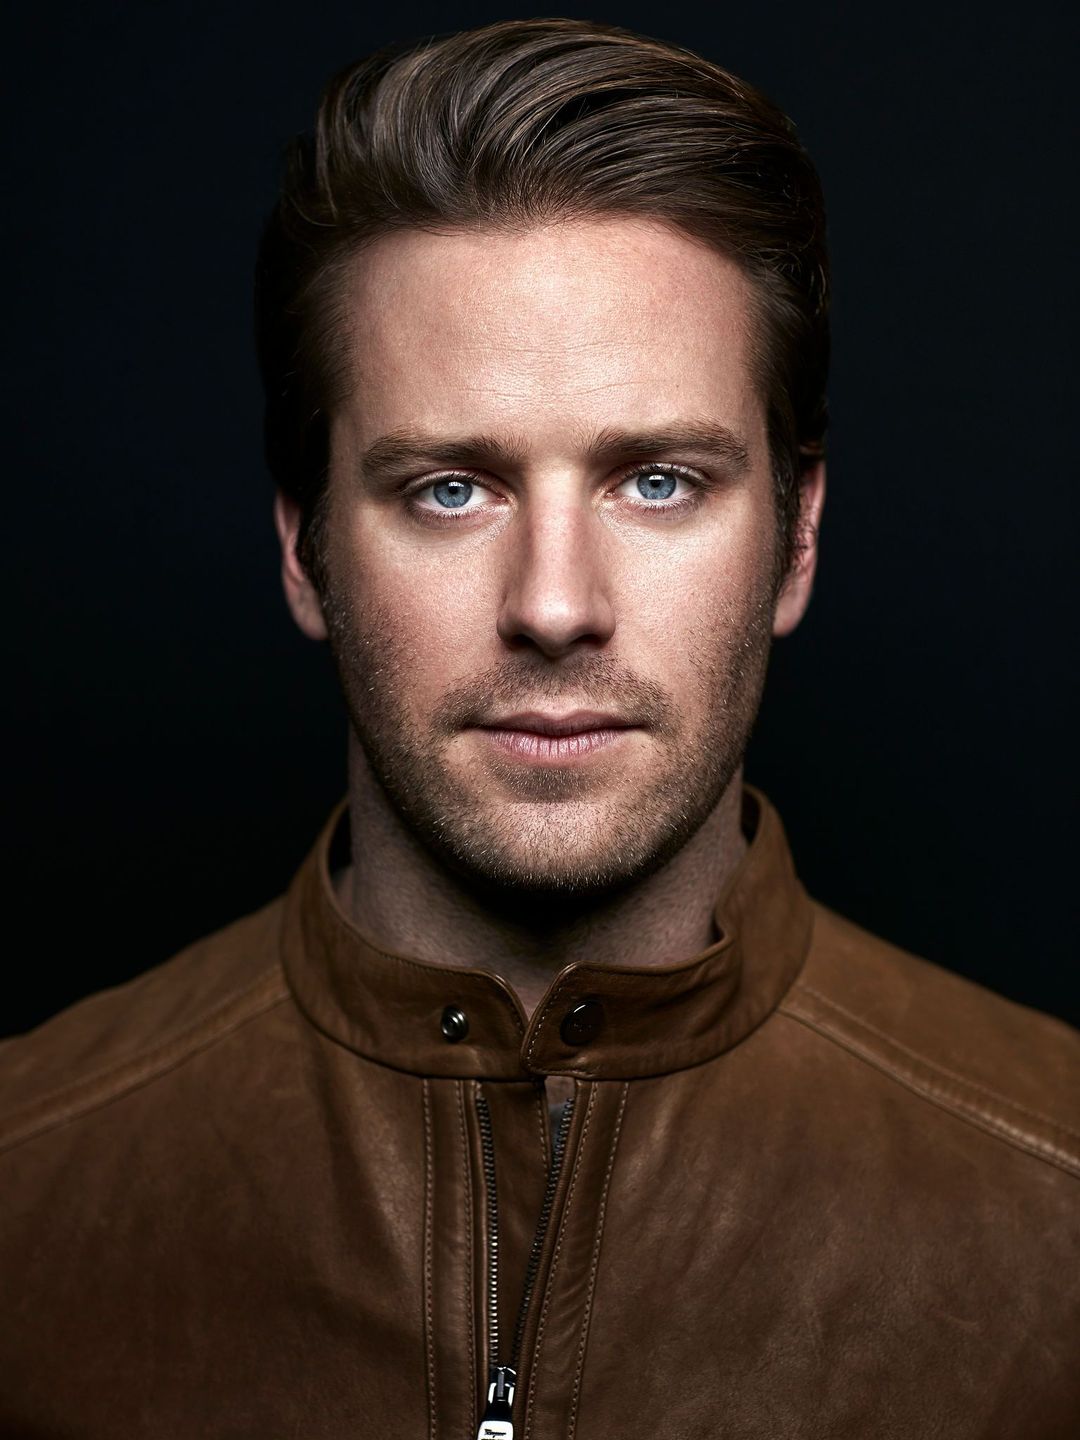 Armie Hammer young pics